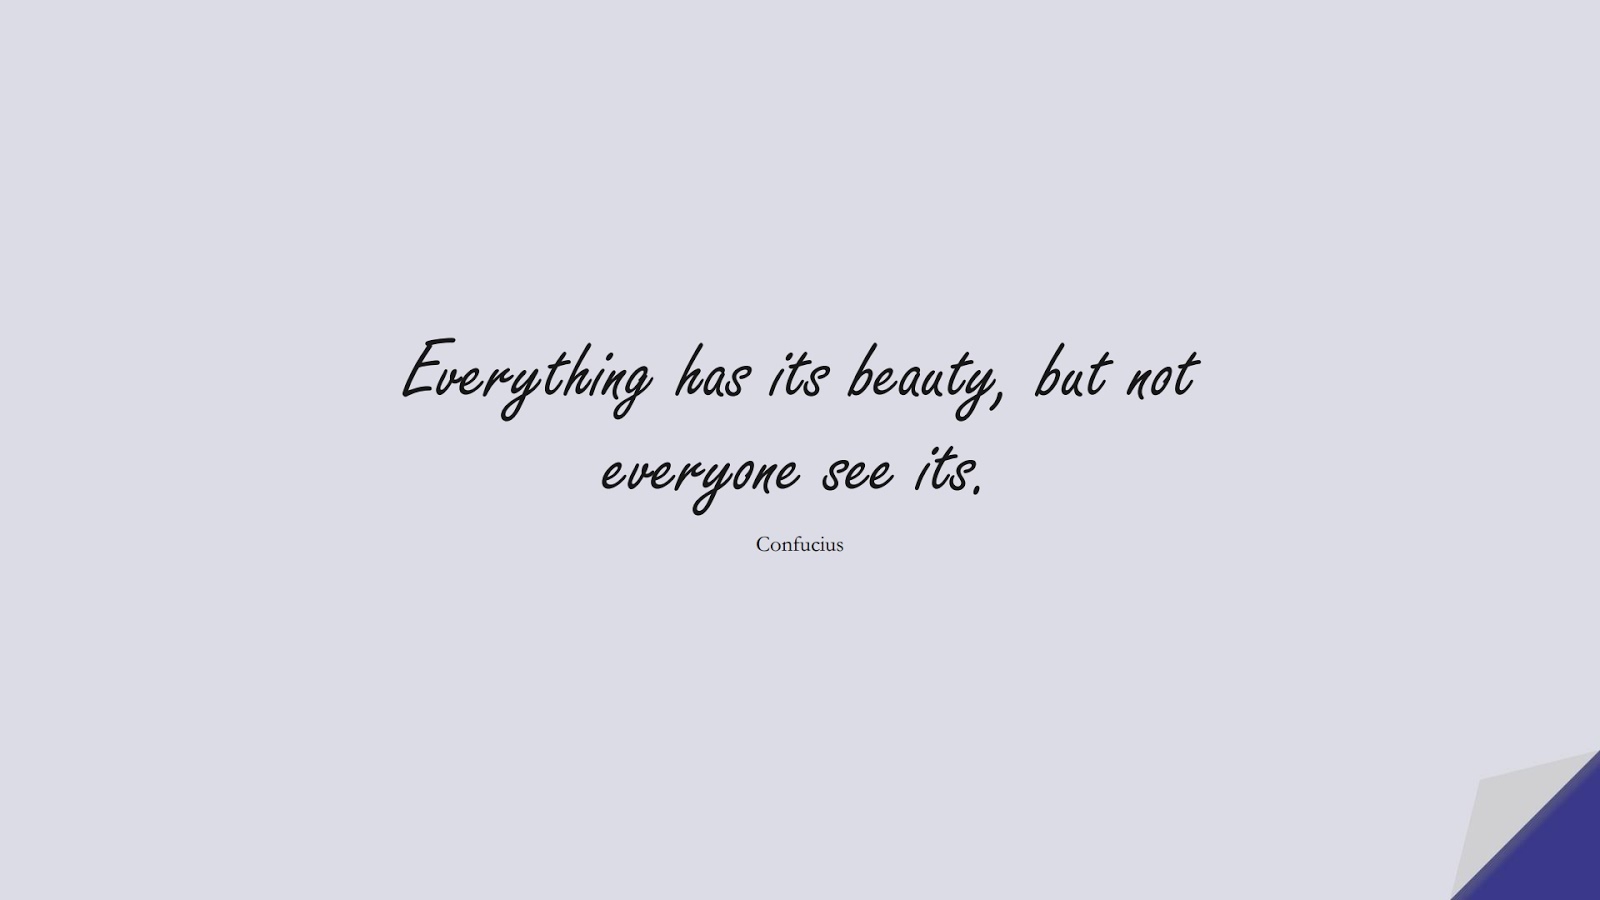 Everything has its beauty, but not everyone see its. (Confucius);  #LifeQuotes